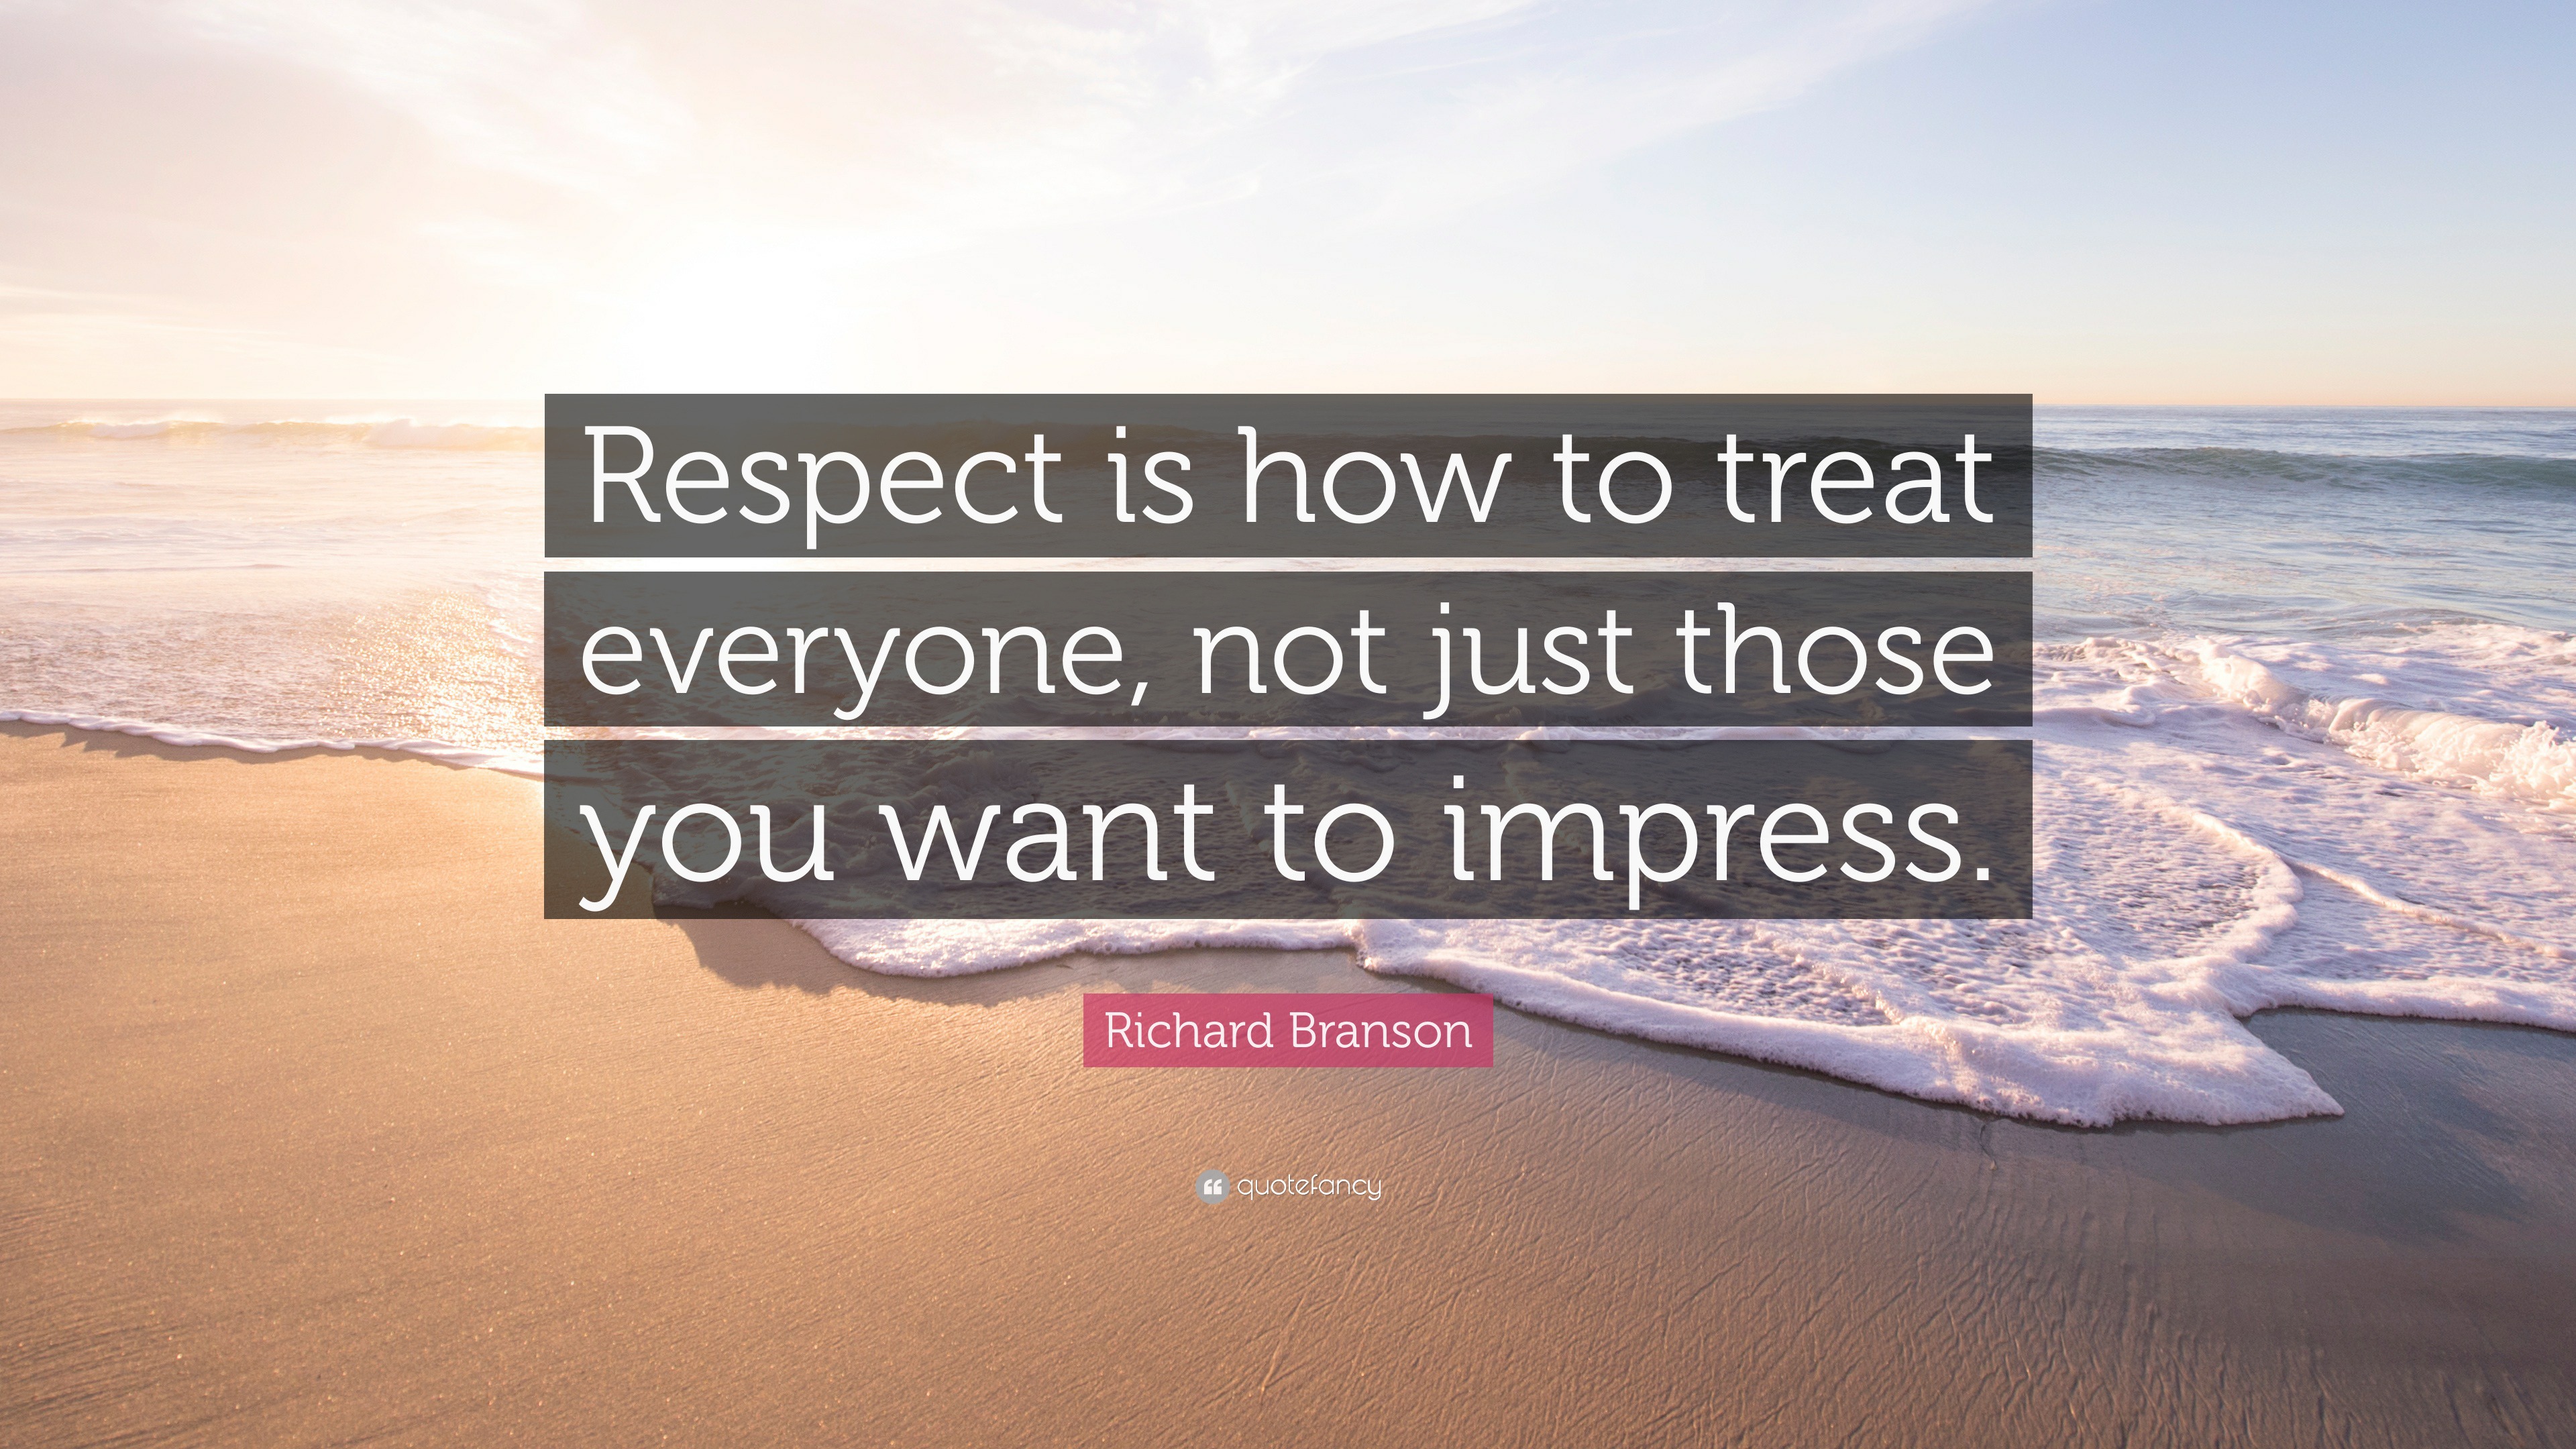 Richard Branson Quote “Respect is how to treat everyone